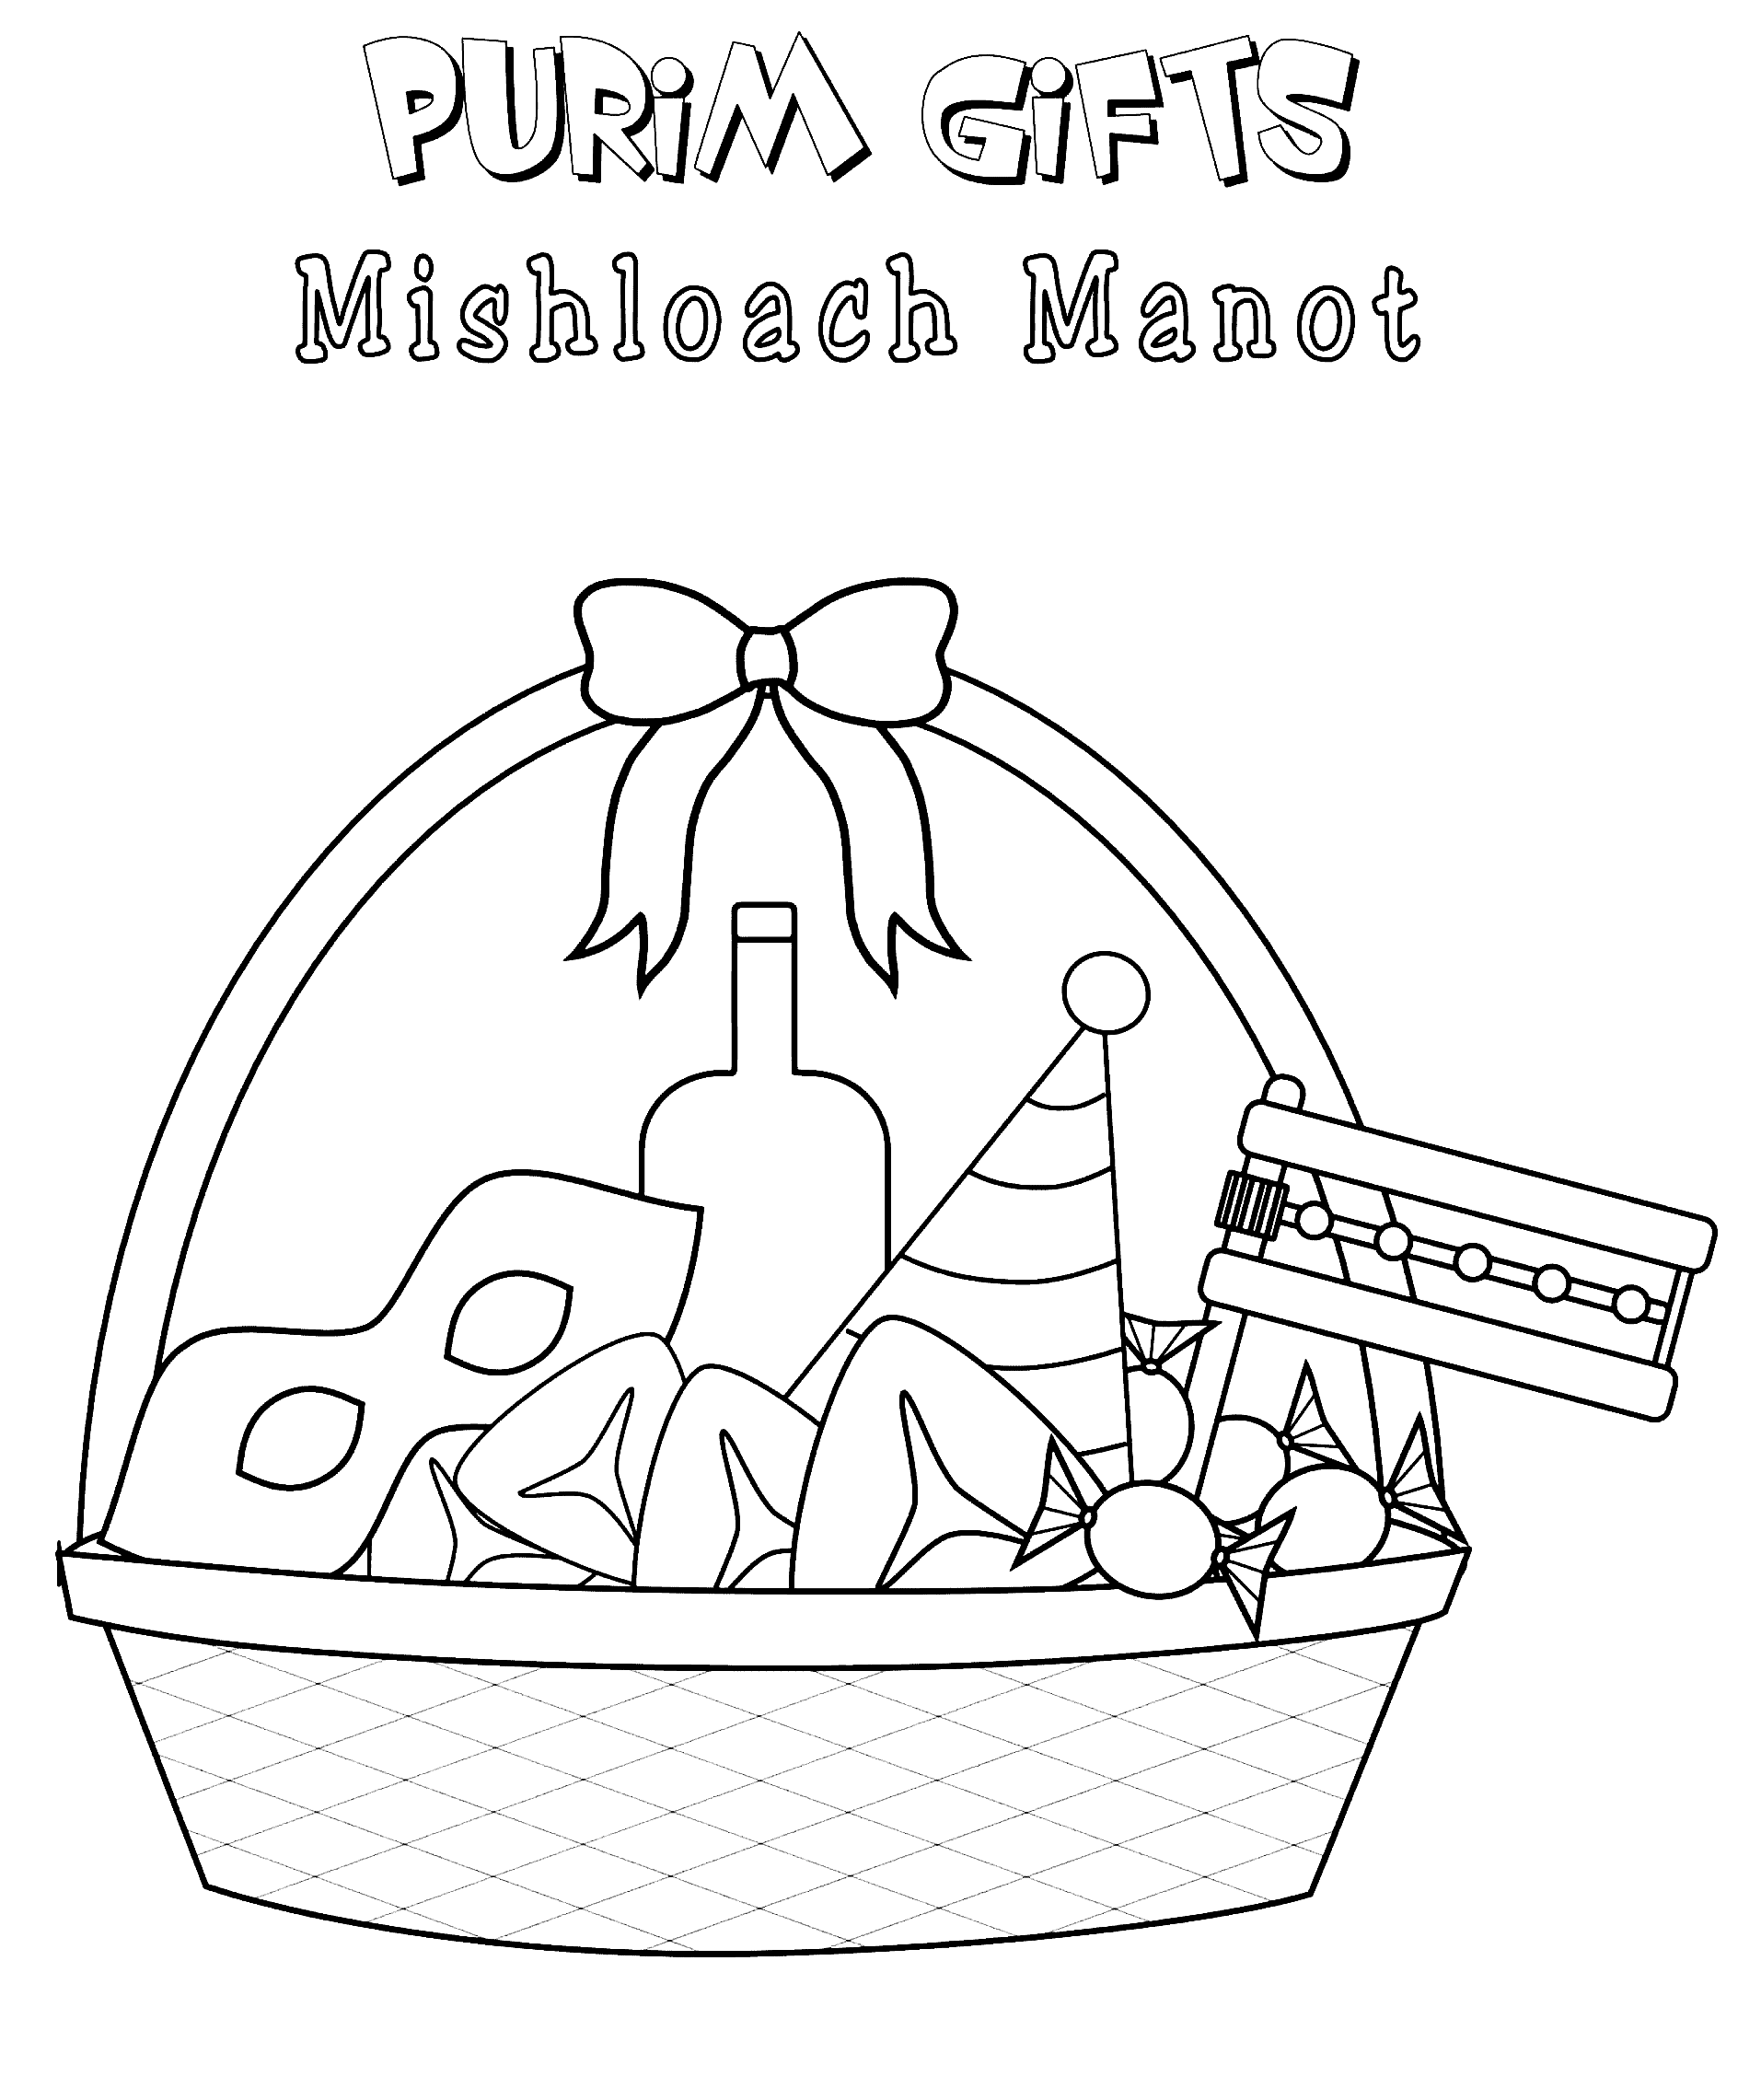 Purim Gifts Mishloach Manot Coloring Page